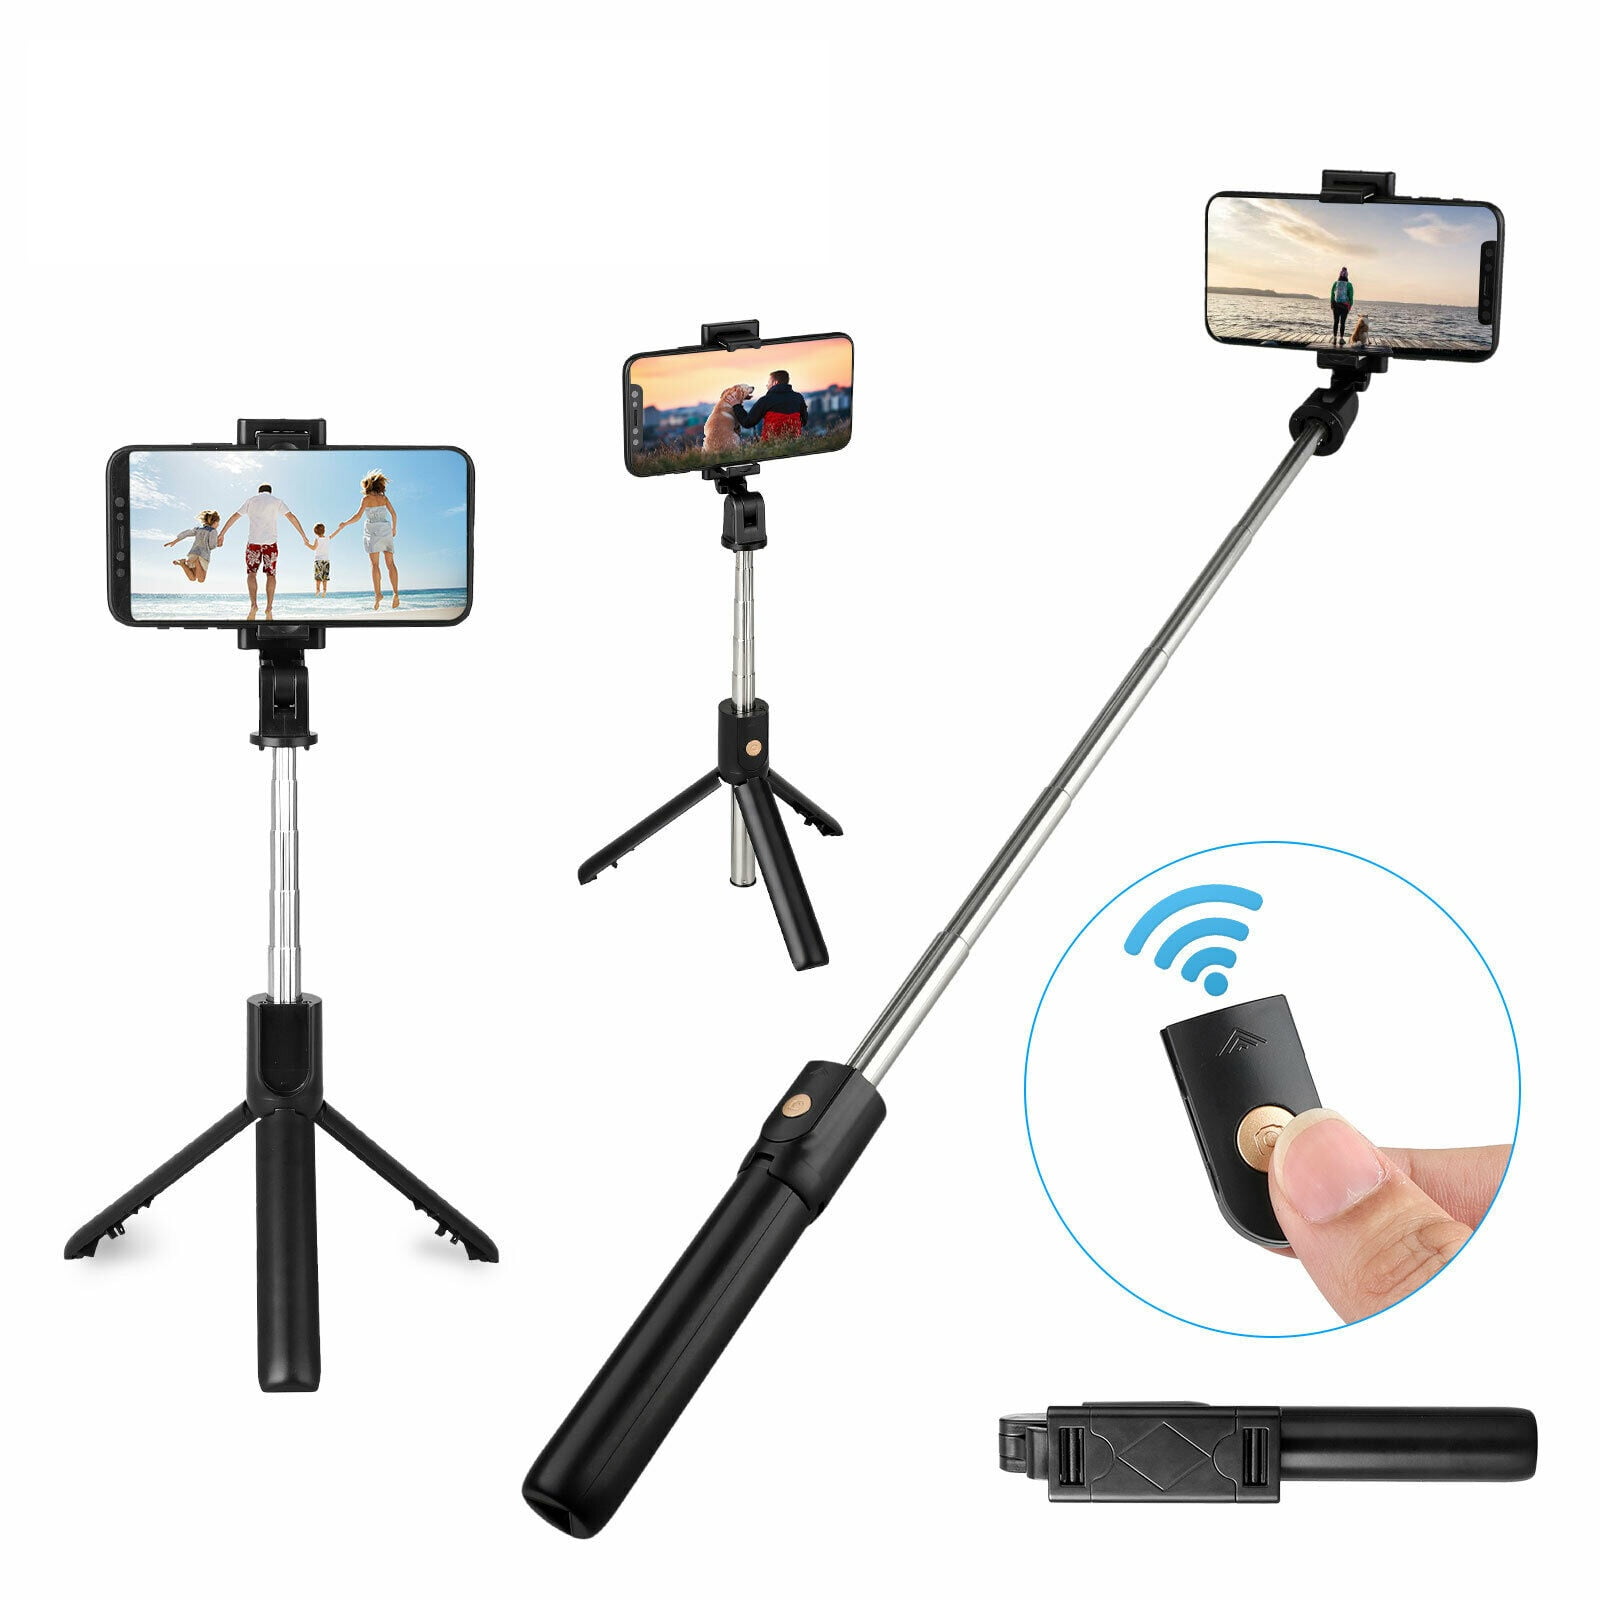 Professional Video Tripod Durable Extendable Bluetooth Tripod Selfie Stick with Fill Light Not Hurt Eye for Phone Sport Camera Selfie Stick Tripod for DSLR Shooting Video Camcorder 